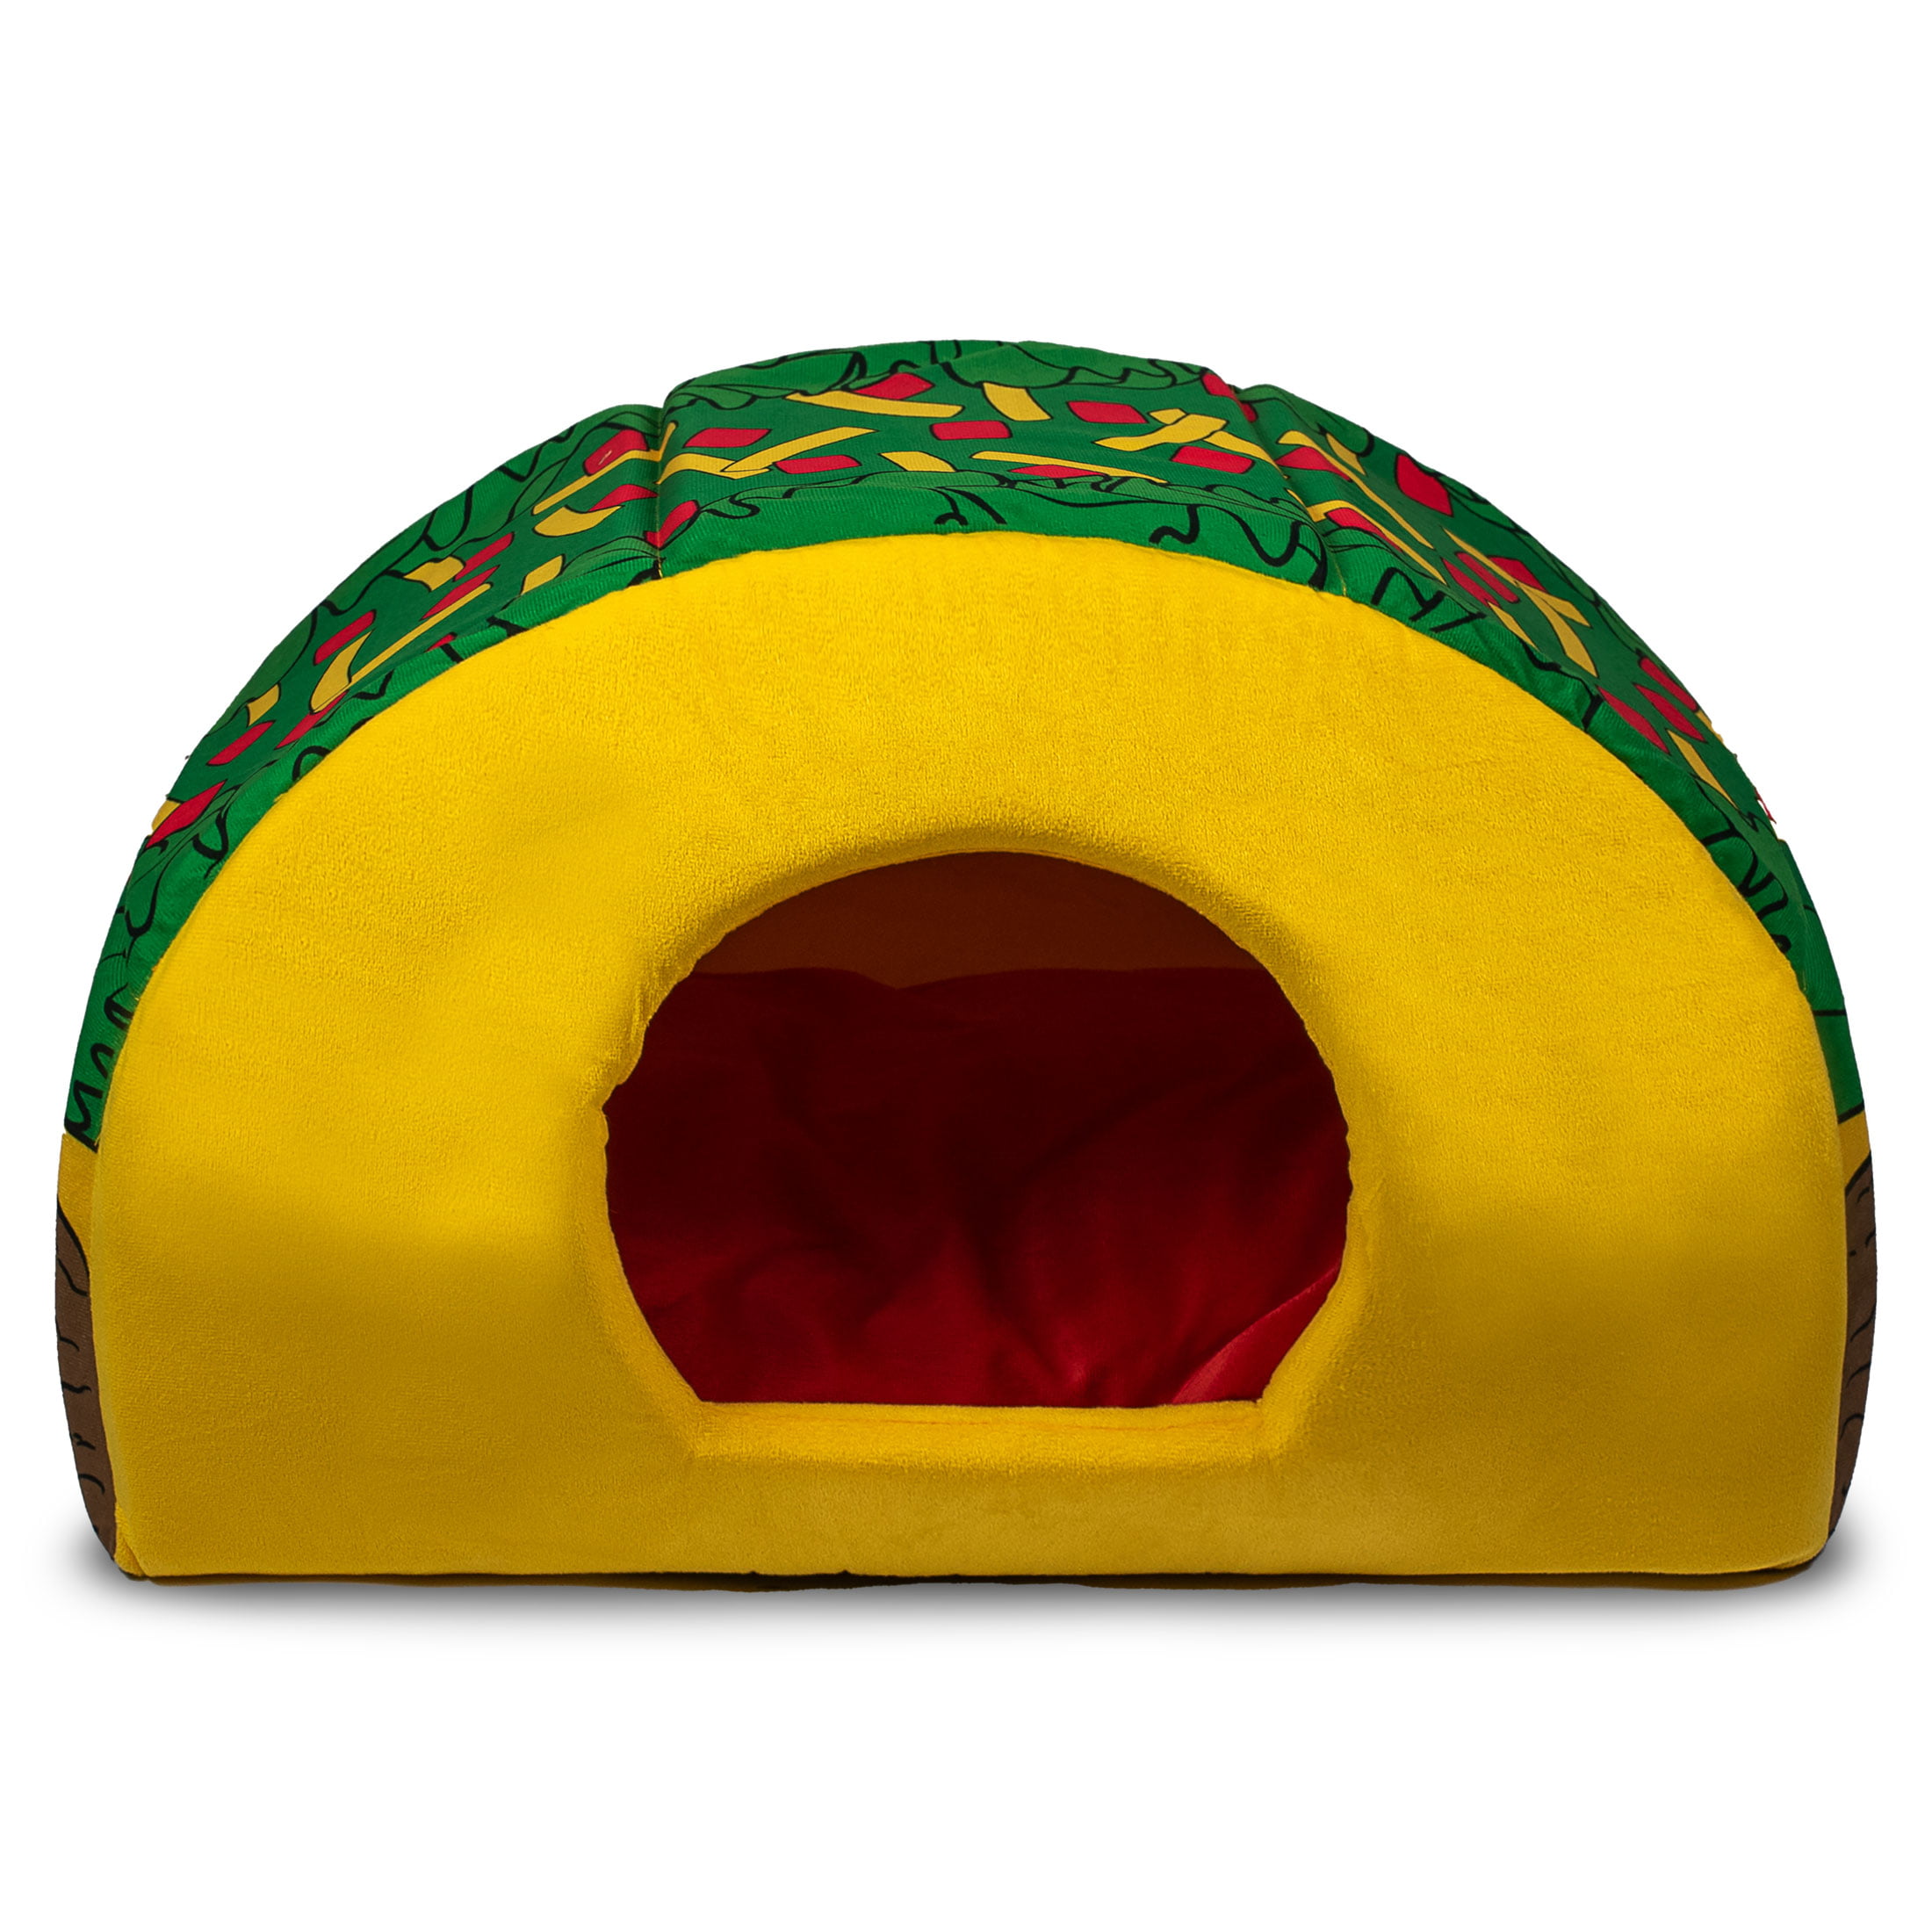 Vibrant Life Taco Small Pet Bed (11"x21") $12.65 + Free S/H on $35+